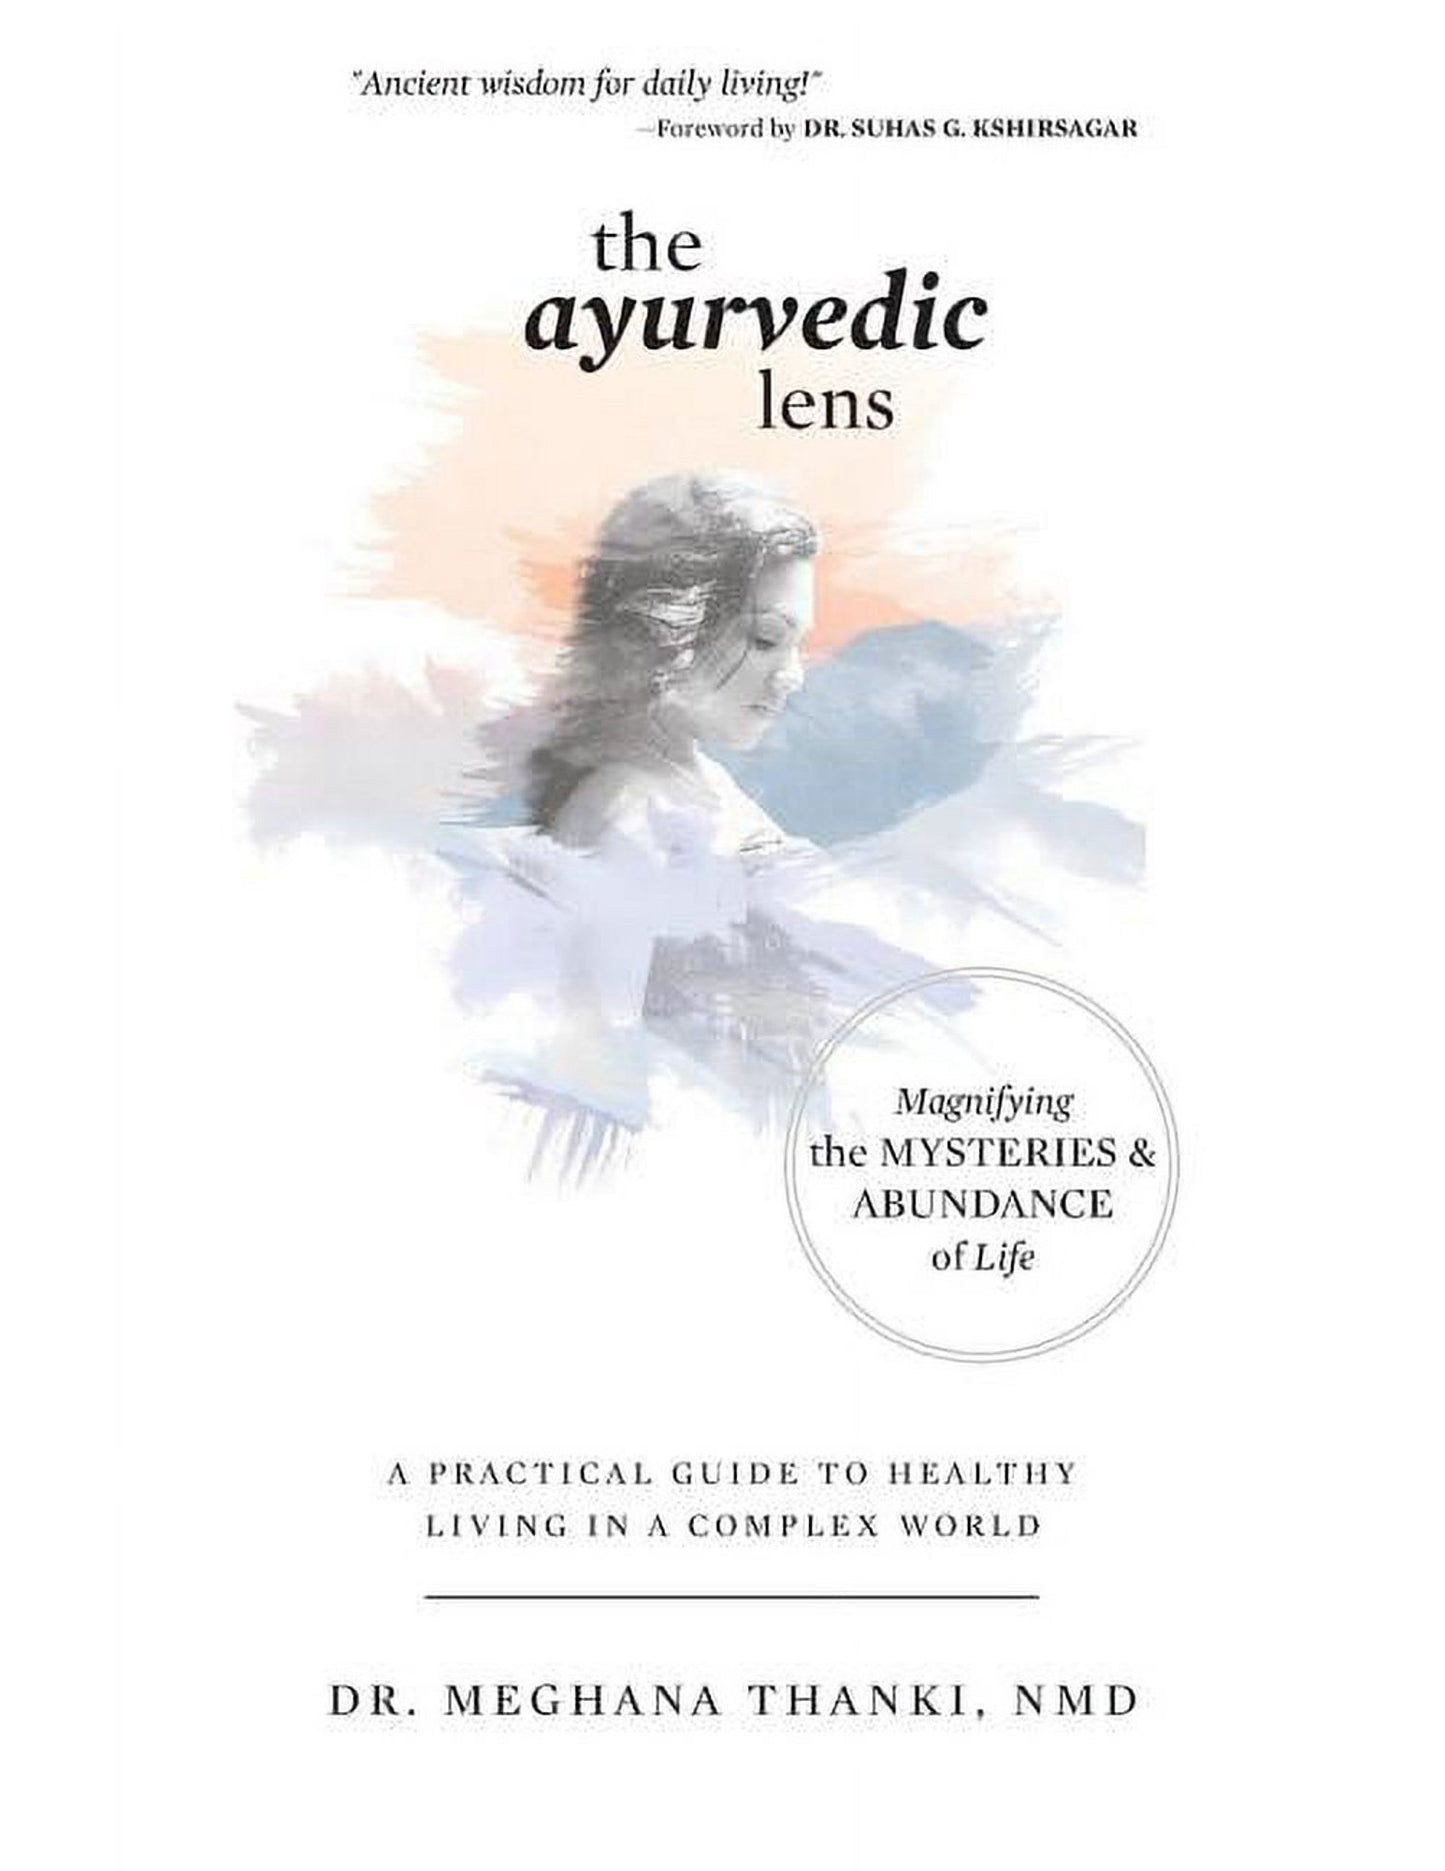 Paperback Book: The Ayurvedic Lens - A Practical Guide to Healthy Living In A Complex World